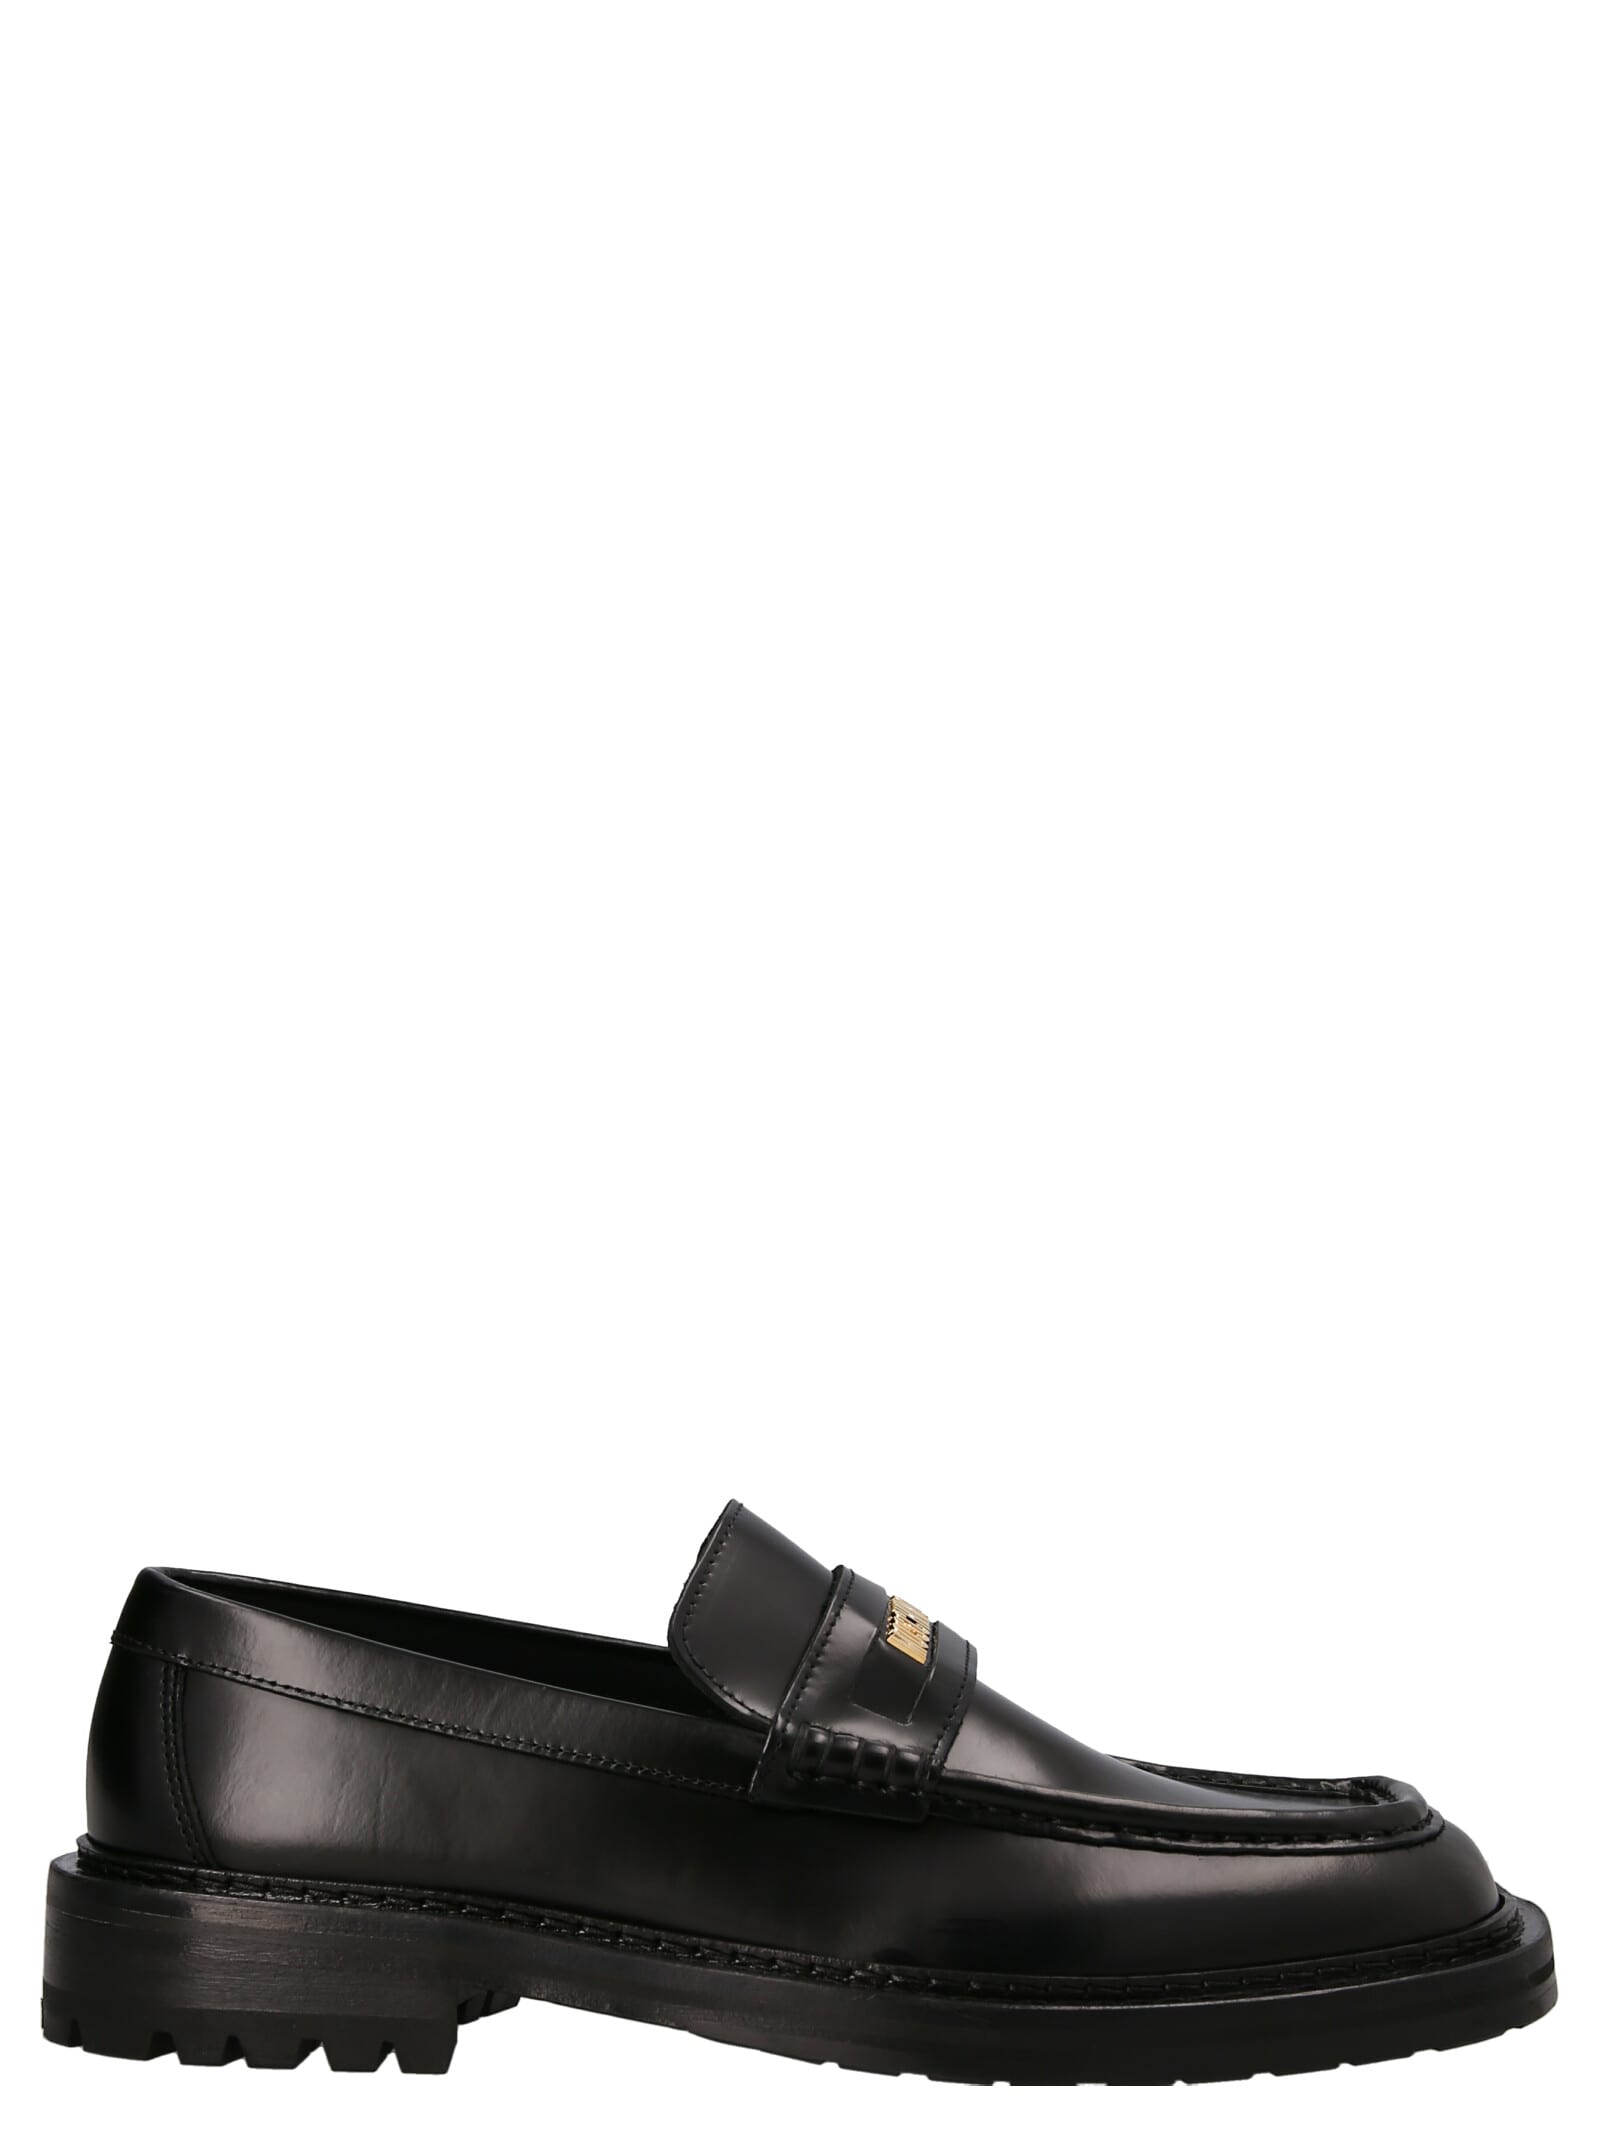 MOSCHINO ABRASIVE LEATHER LOAFERS